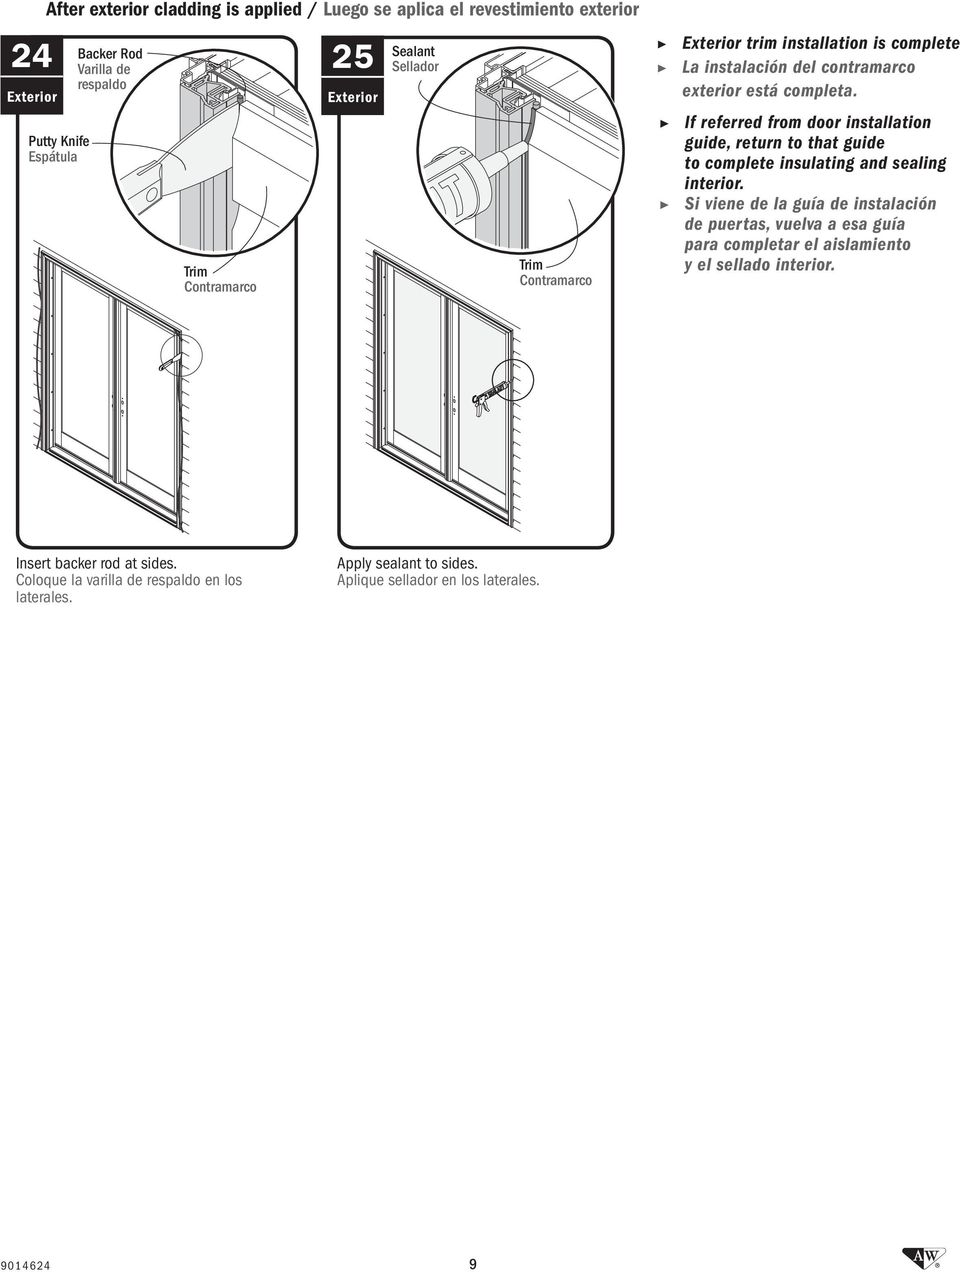 If referred from door installation guide, return to that guide to complete insulating and sealing interior.